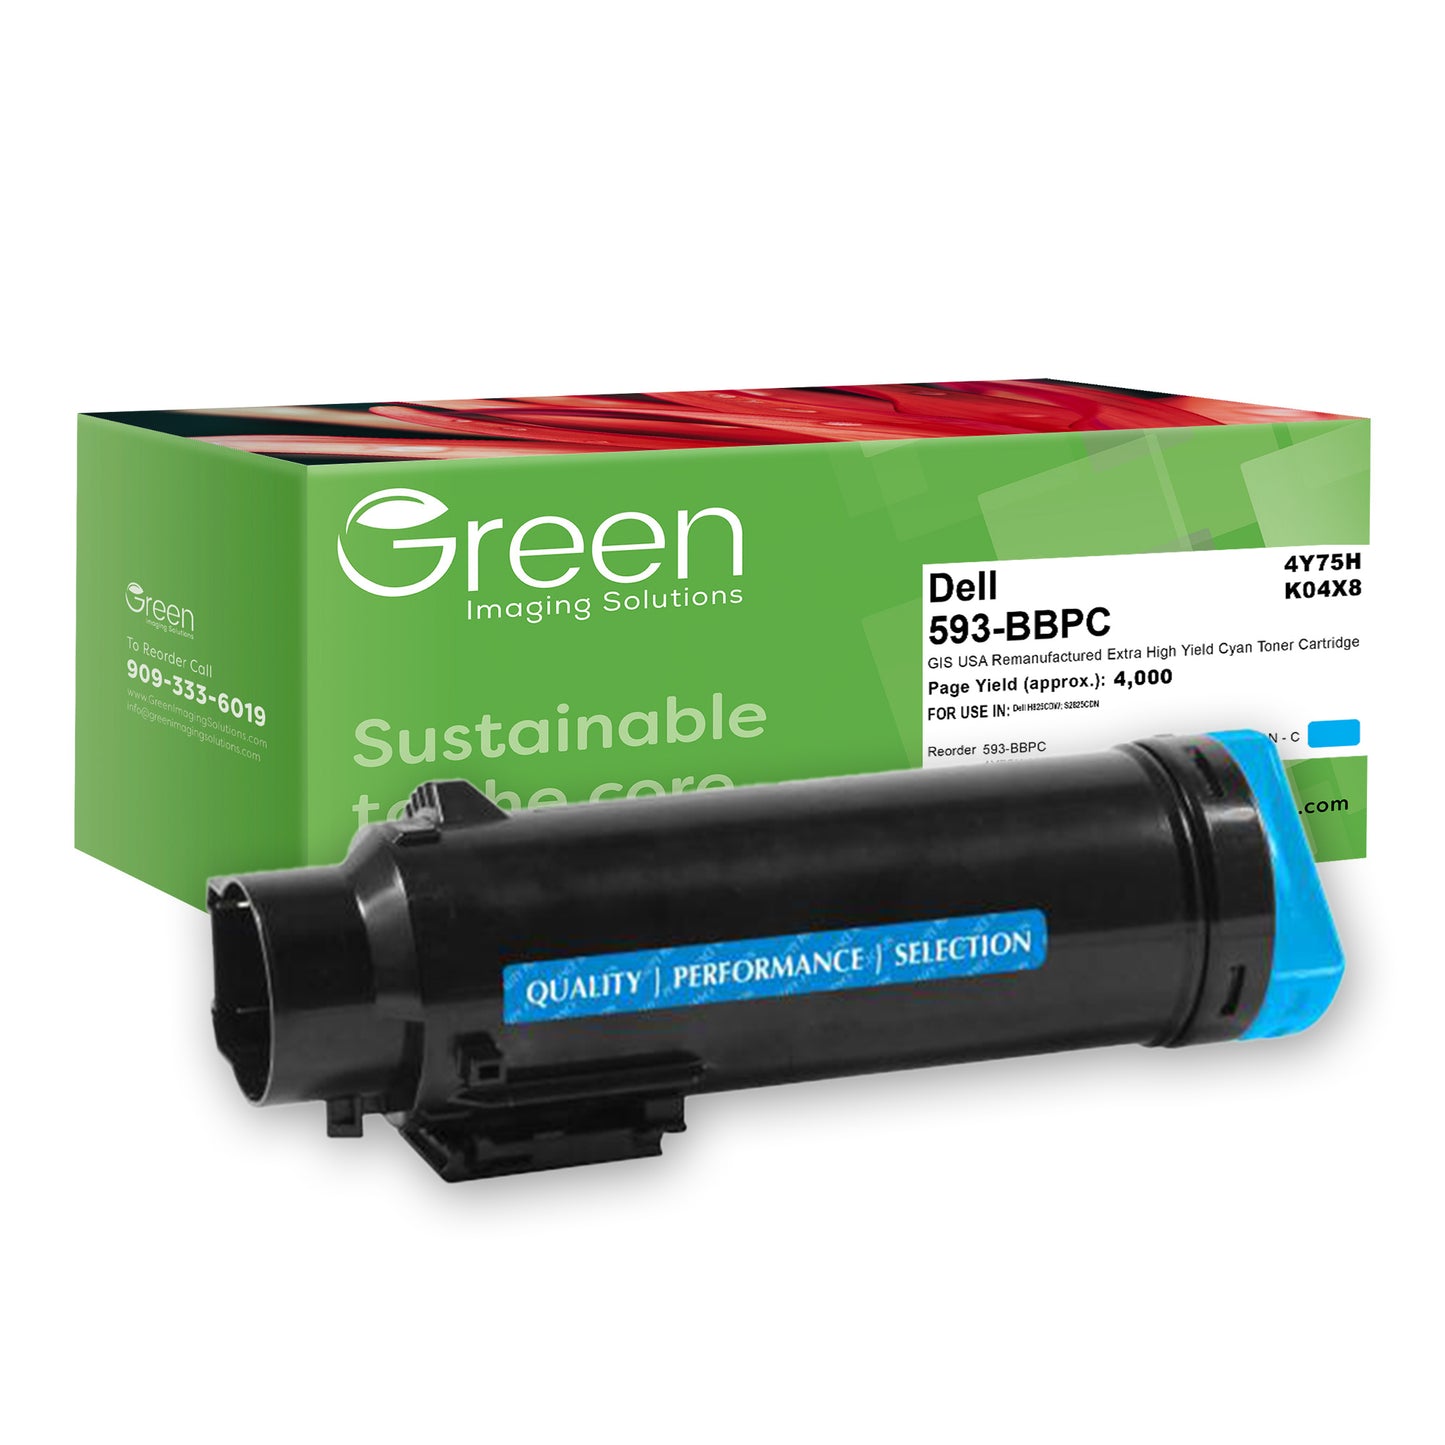 Green Imaging Solutions USA Remanufactured Extra High Yield Cyan Toner Cartridge for Dell H825